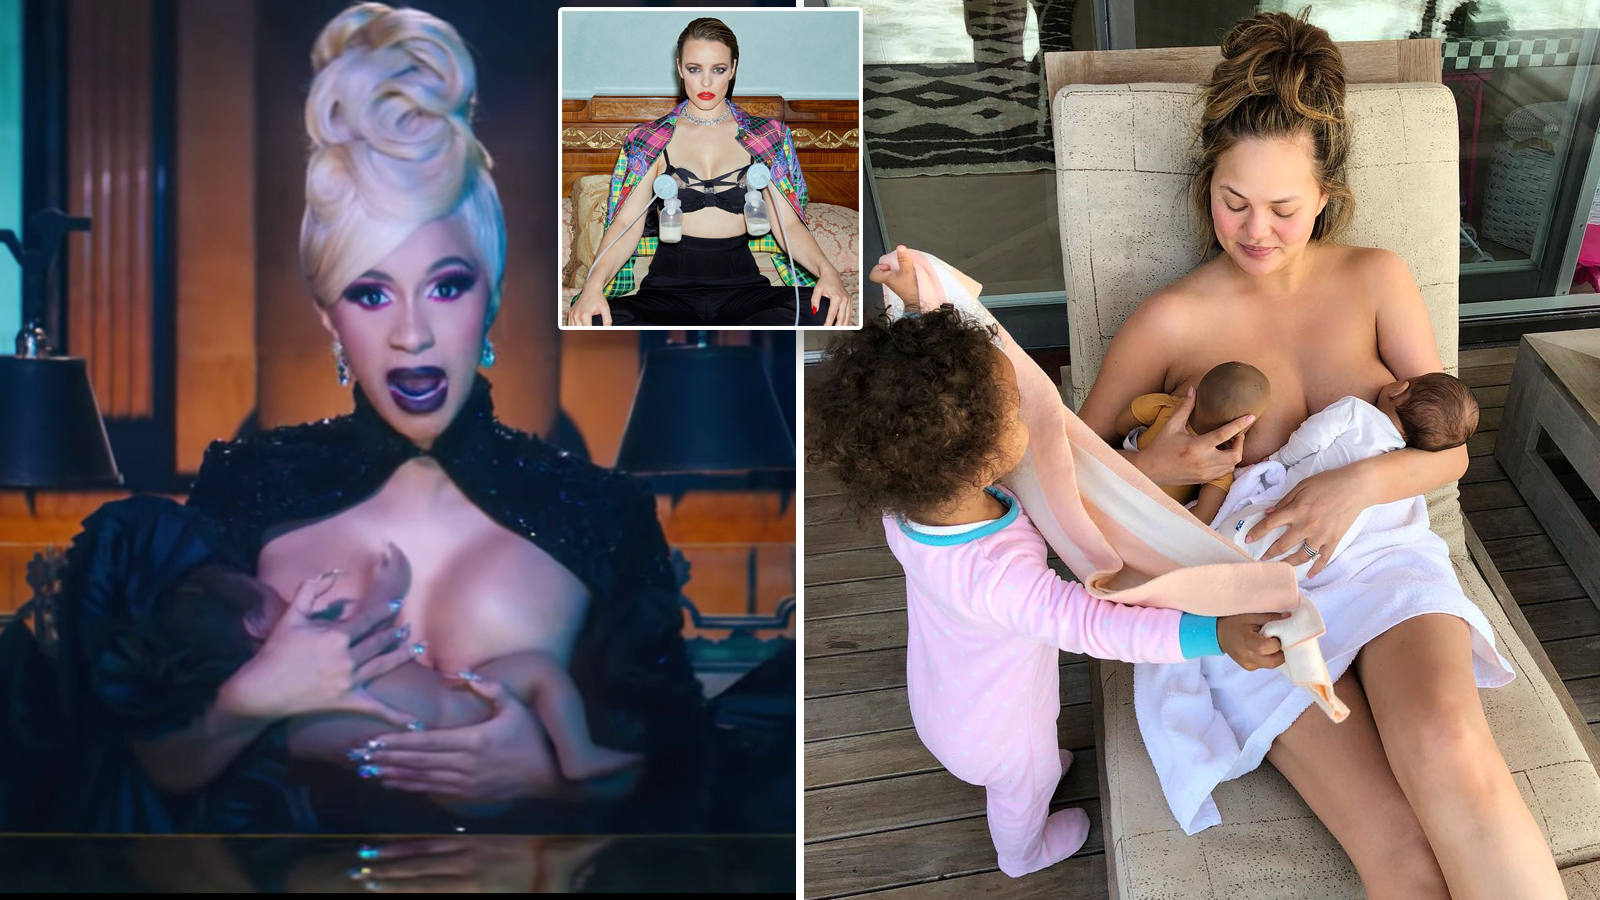 Double D Lactating Milking Tits - Breastfeeding Celebrities: Famous Moms Get Real on Instagram